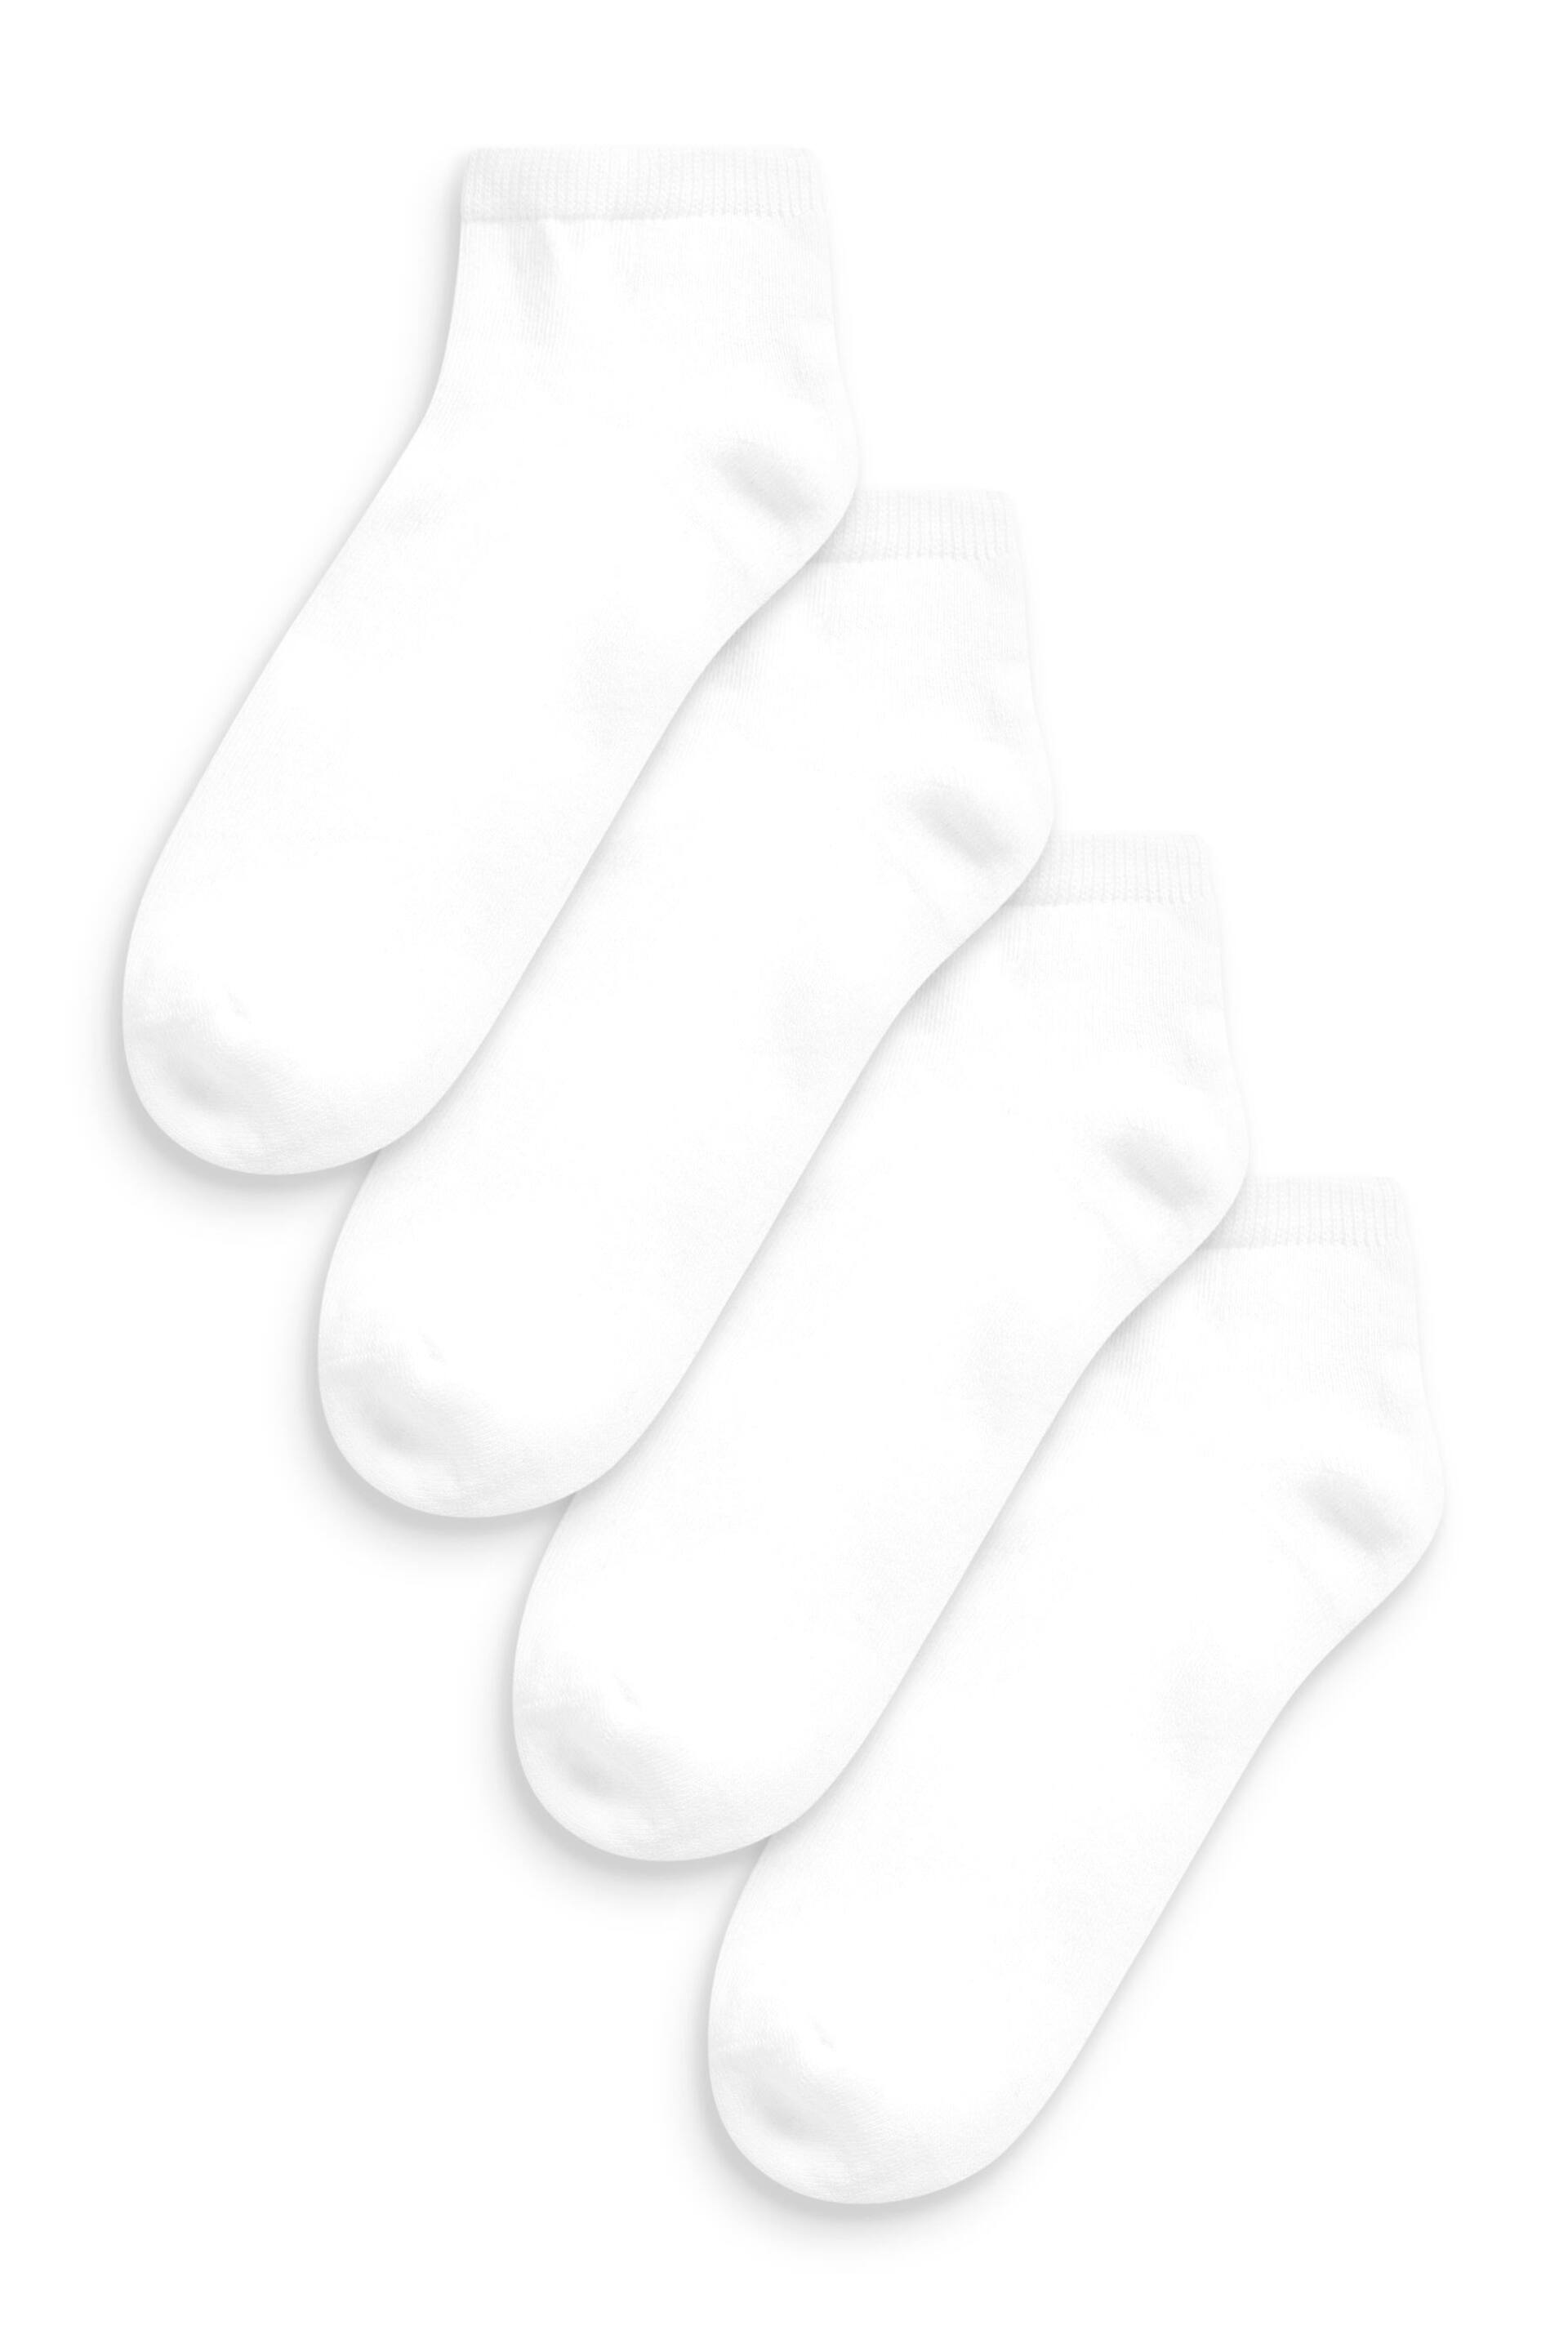 White Cushion Sole Trainer Socks 4 Pack - Image 1 of 2